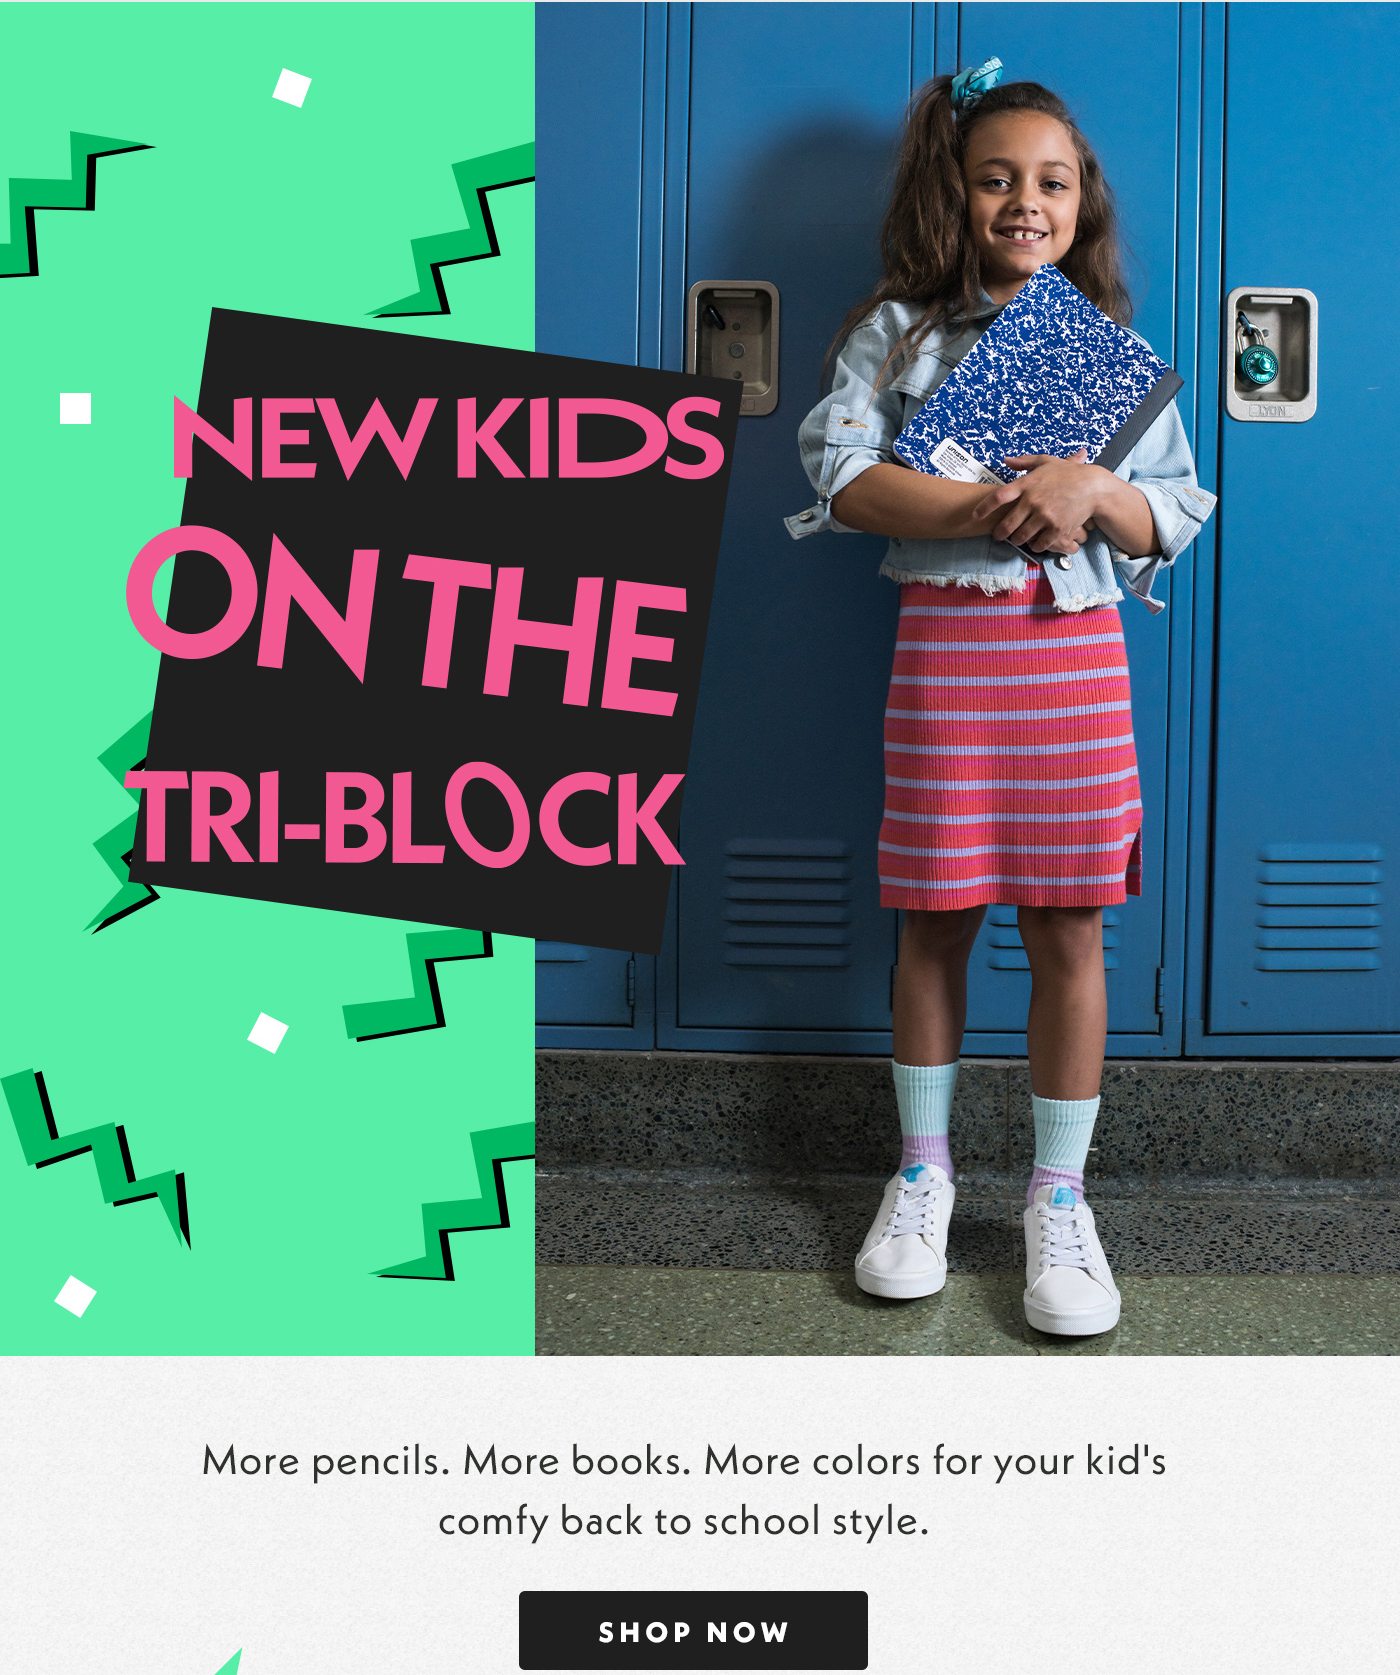 New kids on the Tri Block. More pencils. More books. More colors for your kid's comfy back to school style.